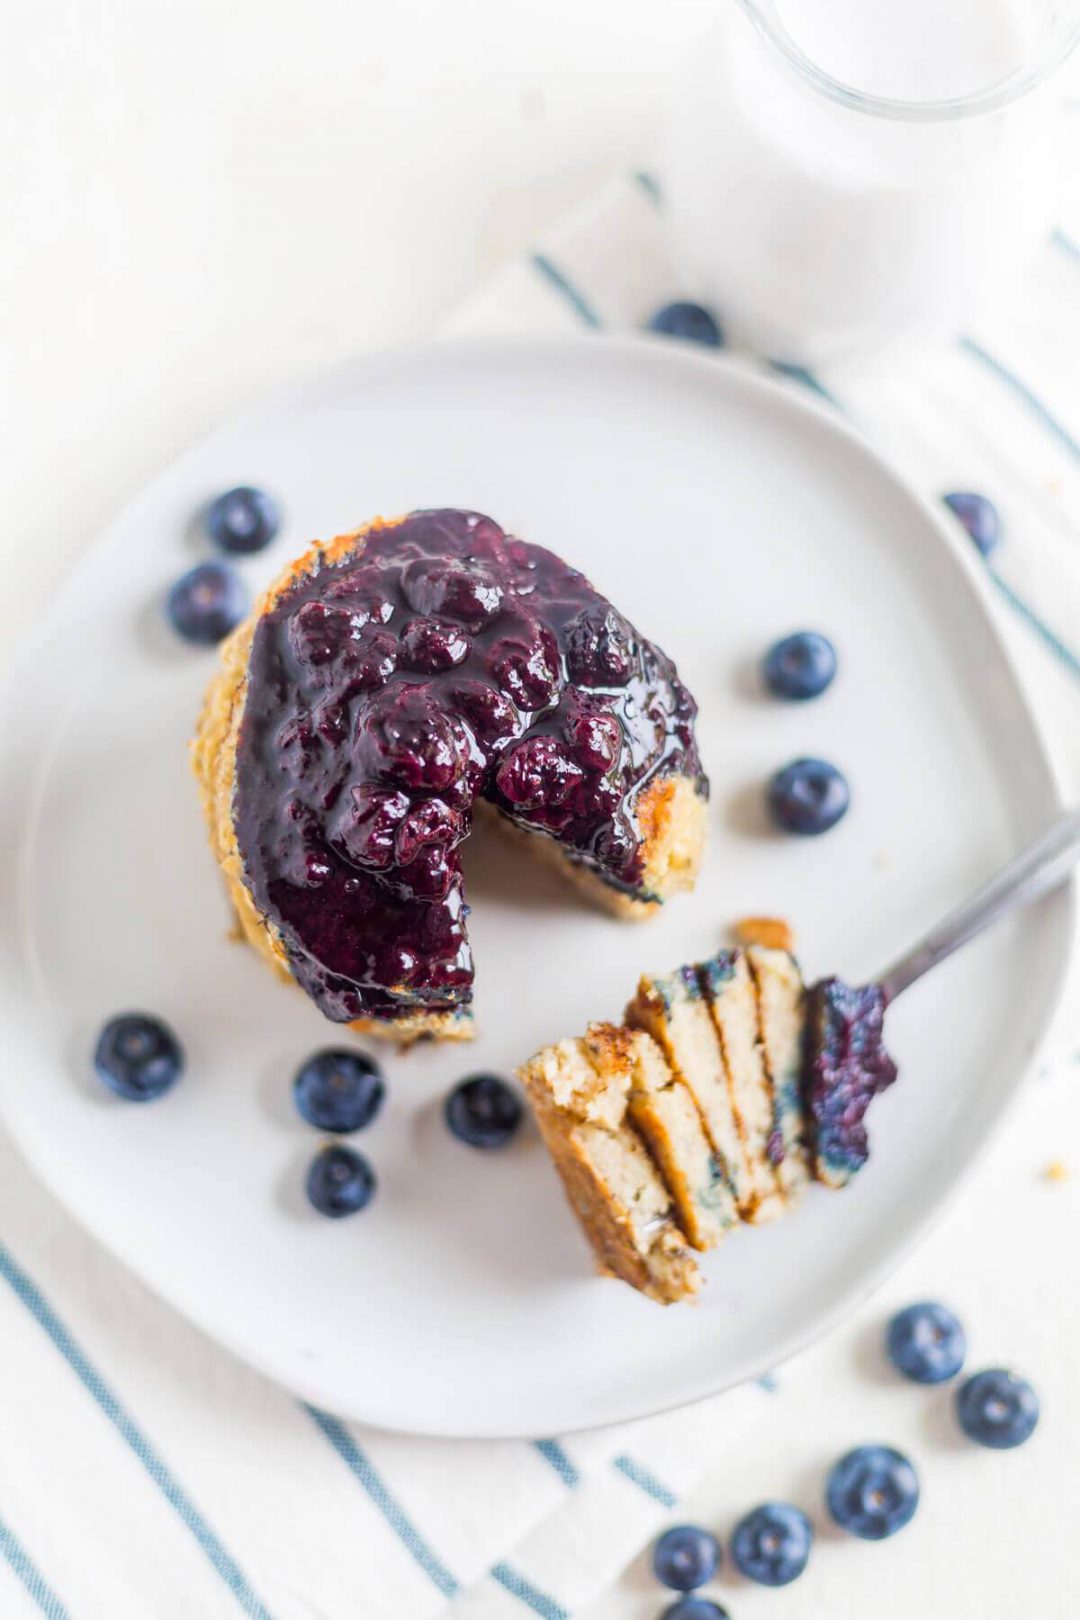 Gluten-free Coconut Flour Pancakes with Blueberry Syrup on a plate